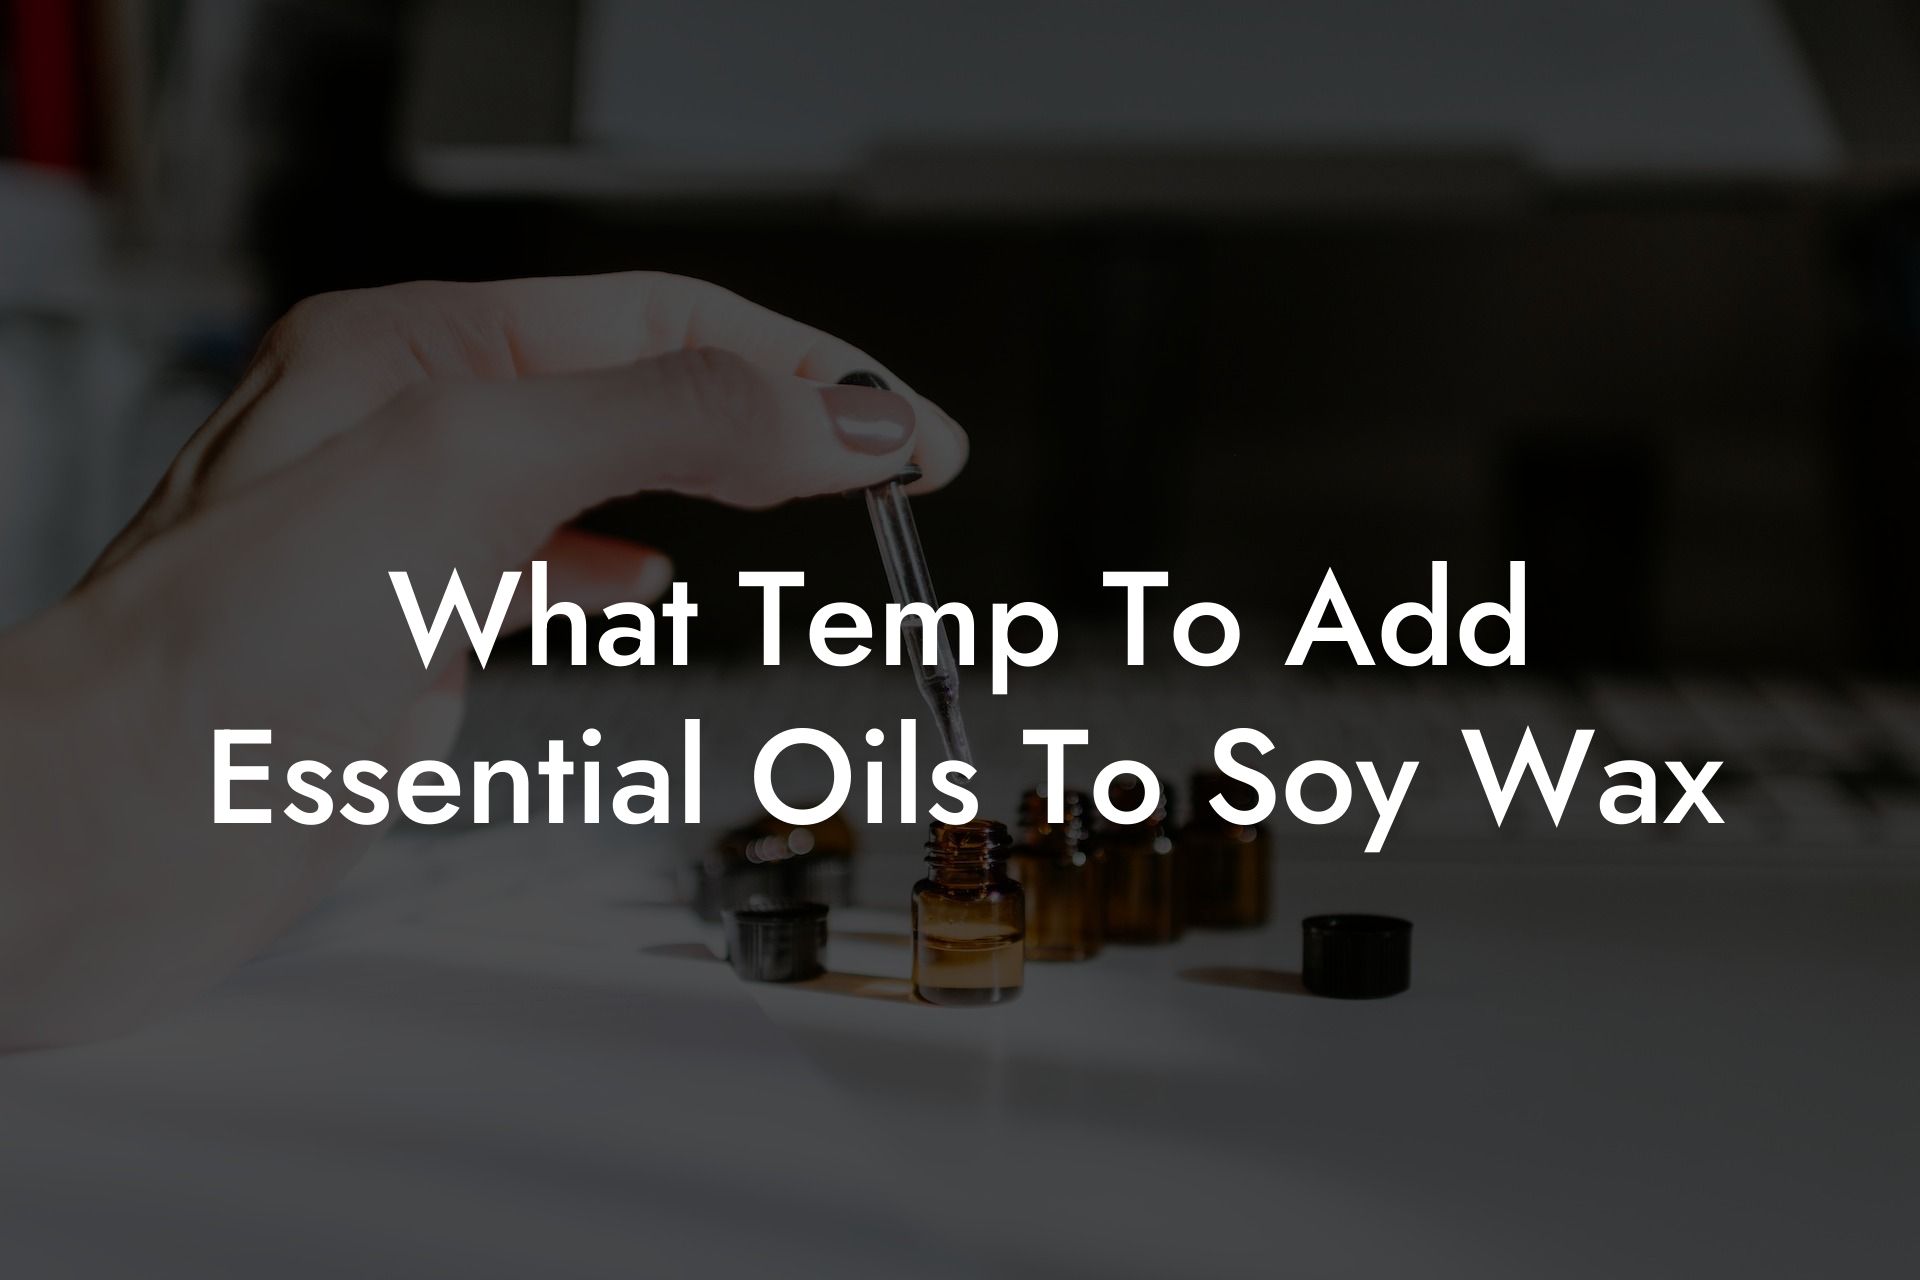 What Temp To Add Essential Oils To Soy Wax